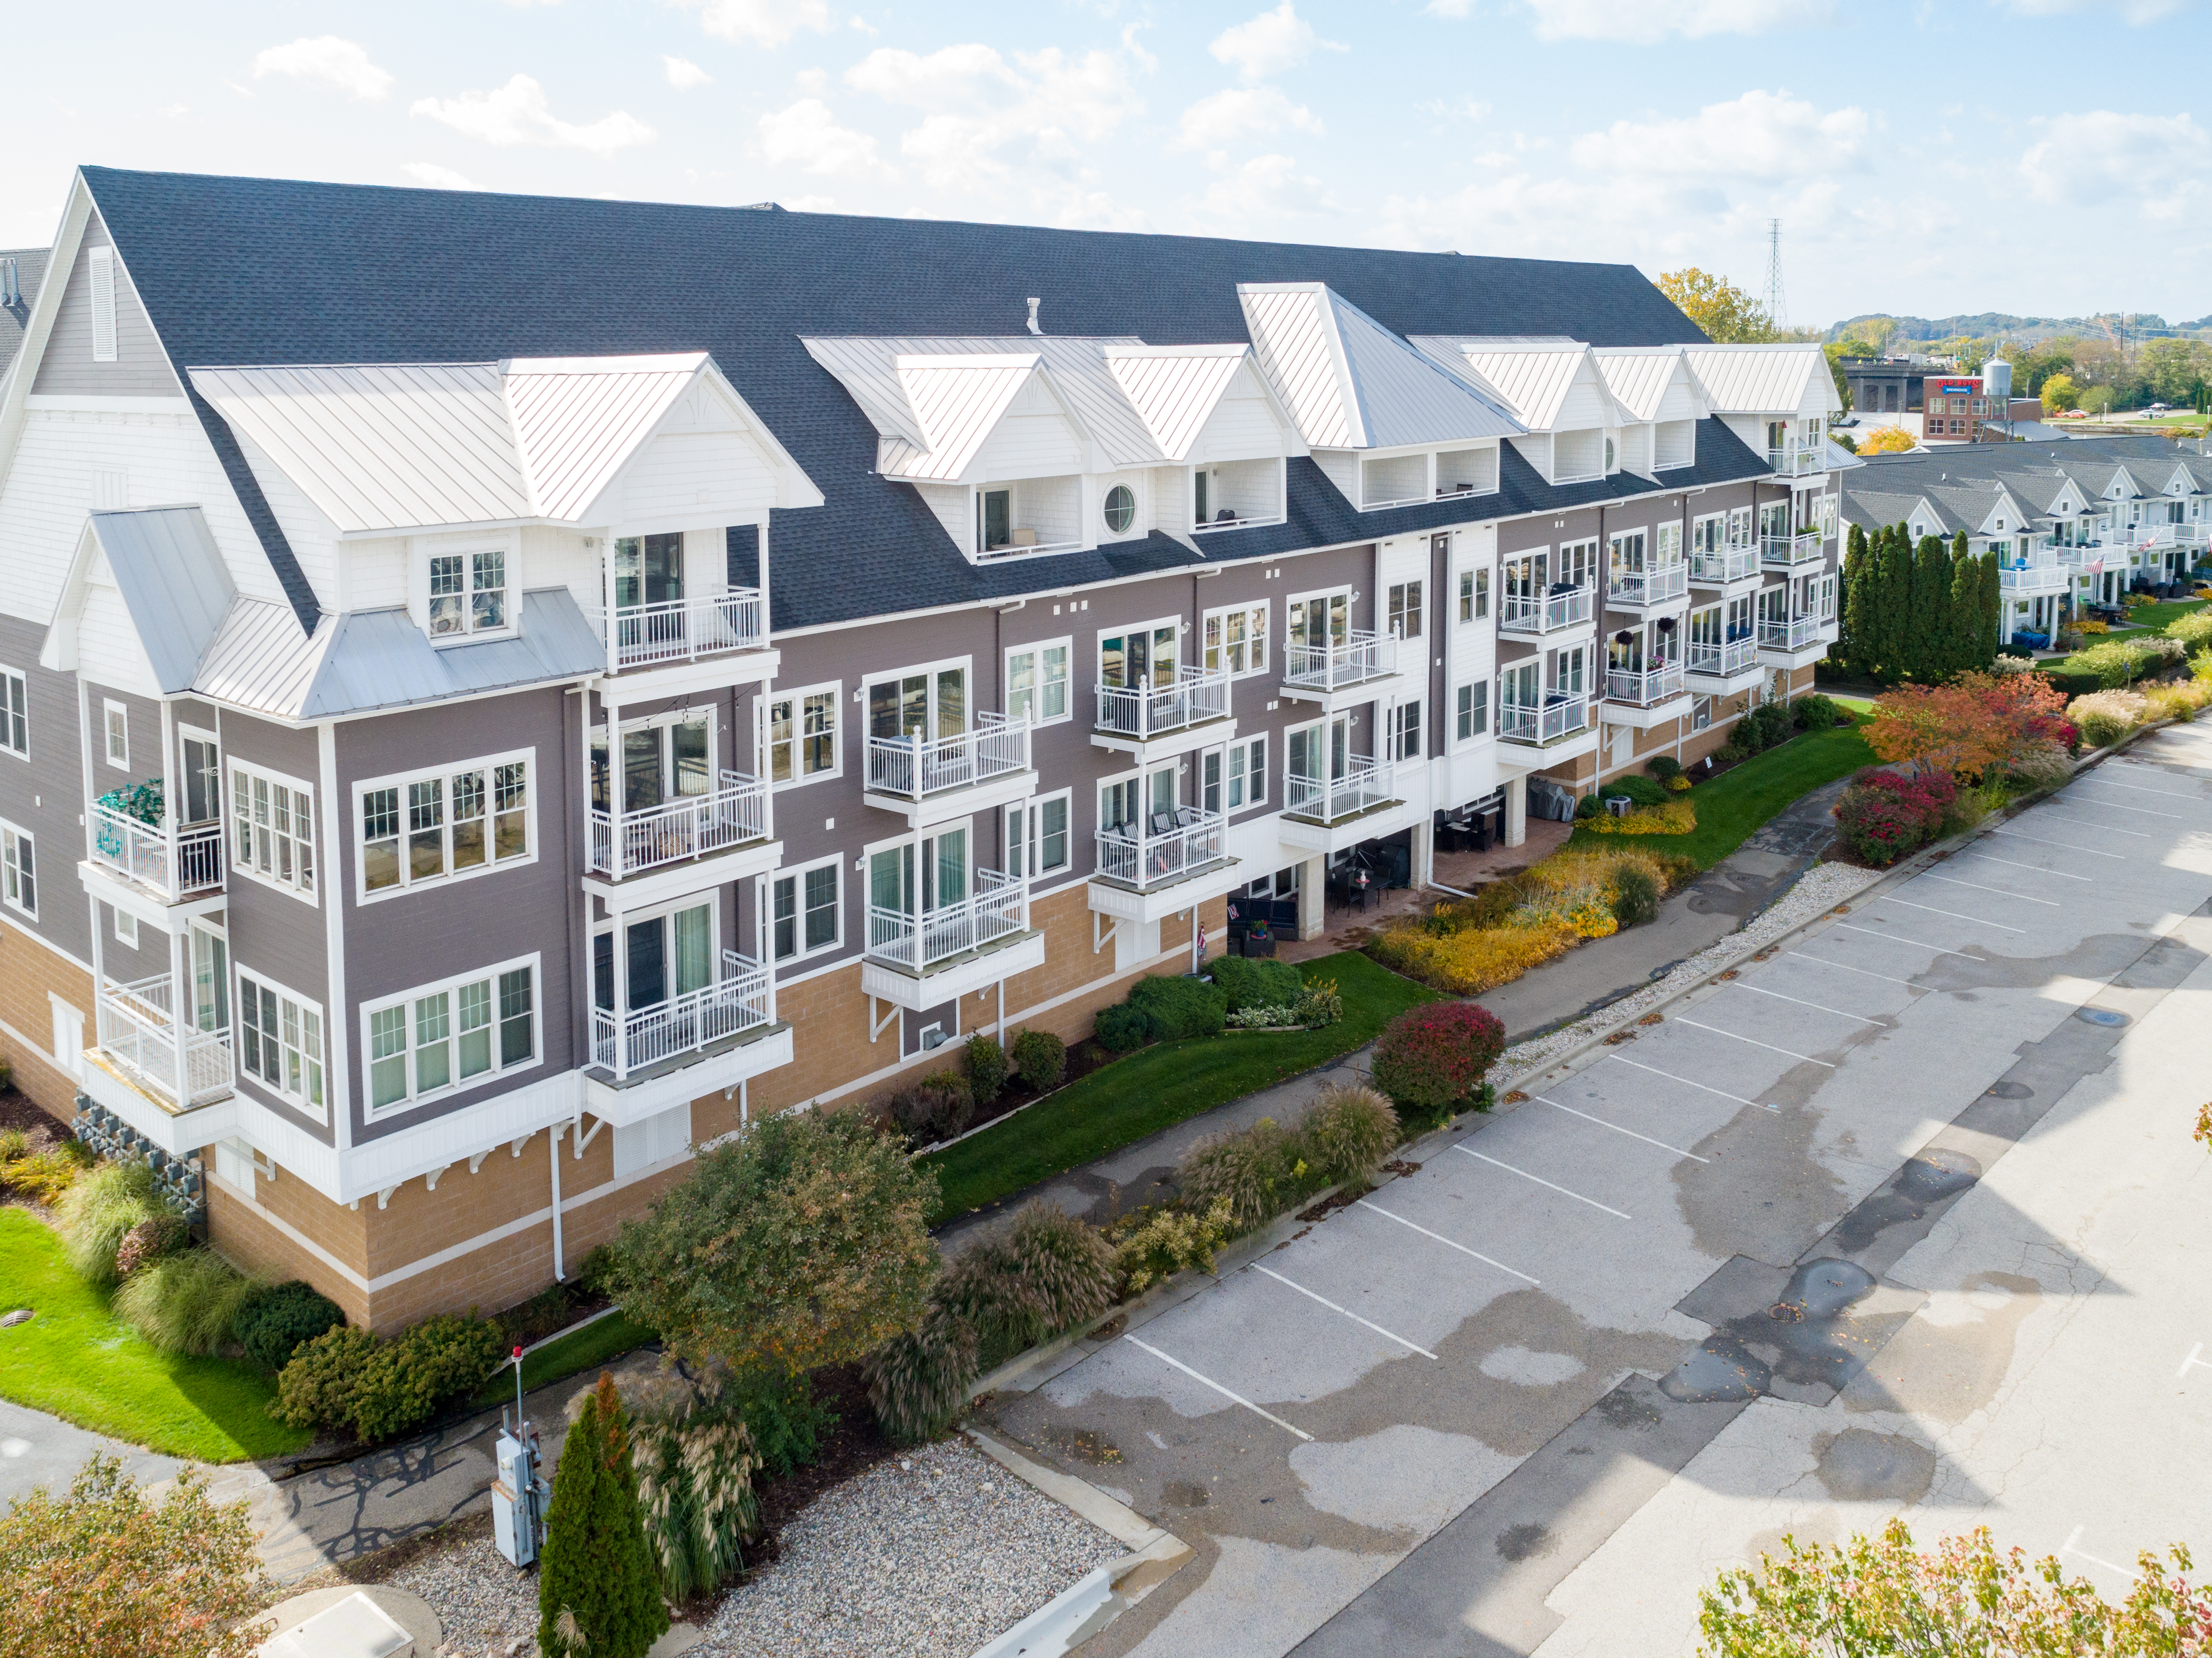 View Pointe is located on the third floor of the Lake Pointe Condos.